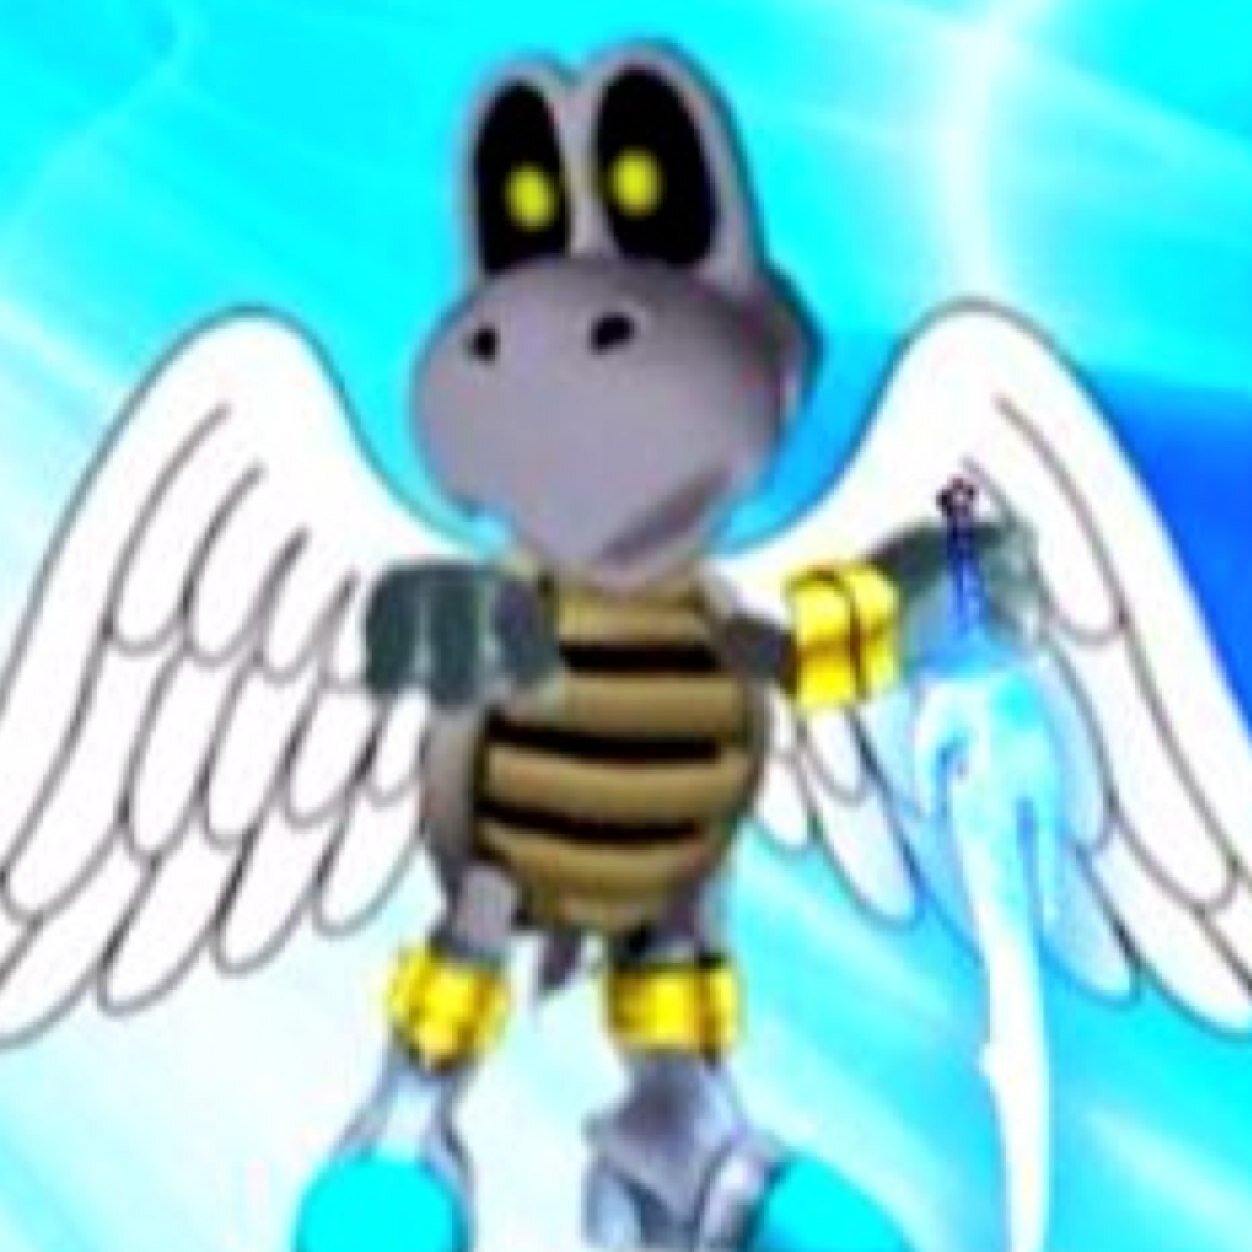 Hi my name is Sky Drybones I'm cool, fun and nice, I have a family - Allie The Yoshi, our son Shadow The Dry-Yoshi and his girlfriend Starlight The Winged-Yoshi